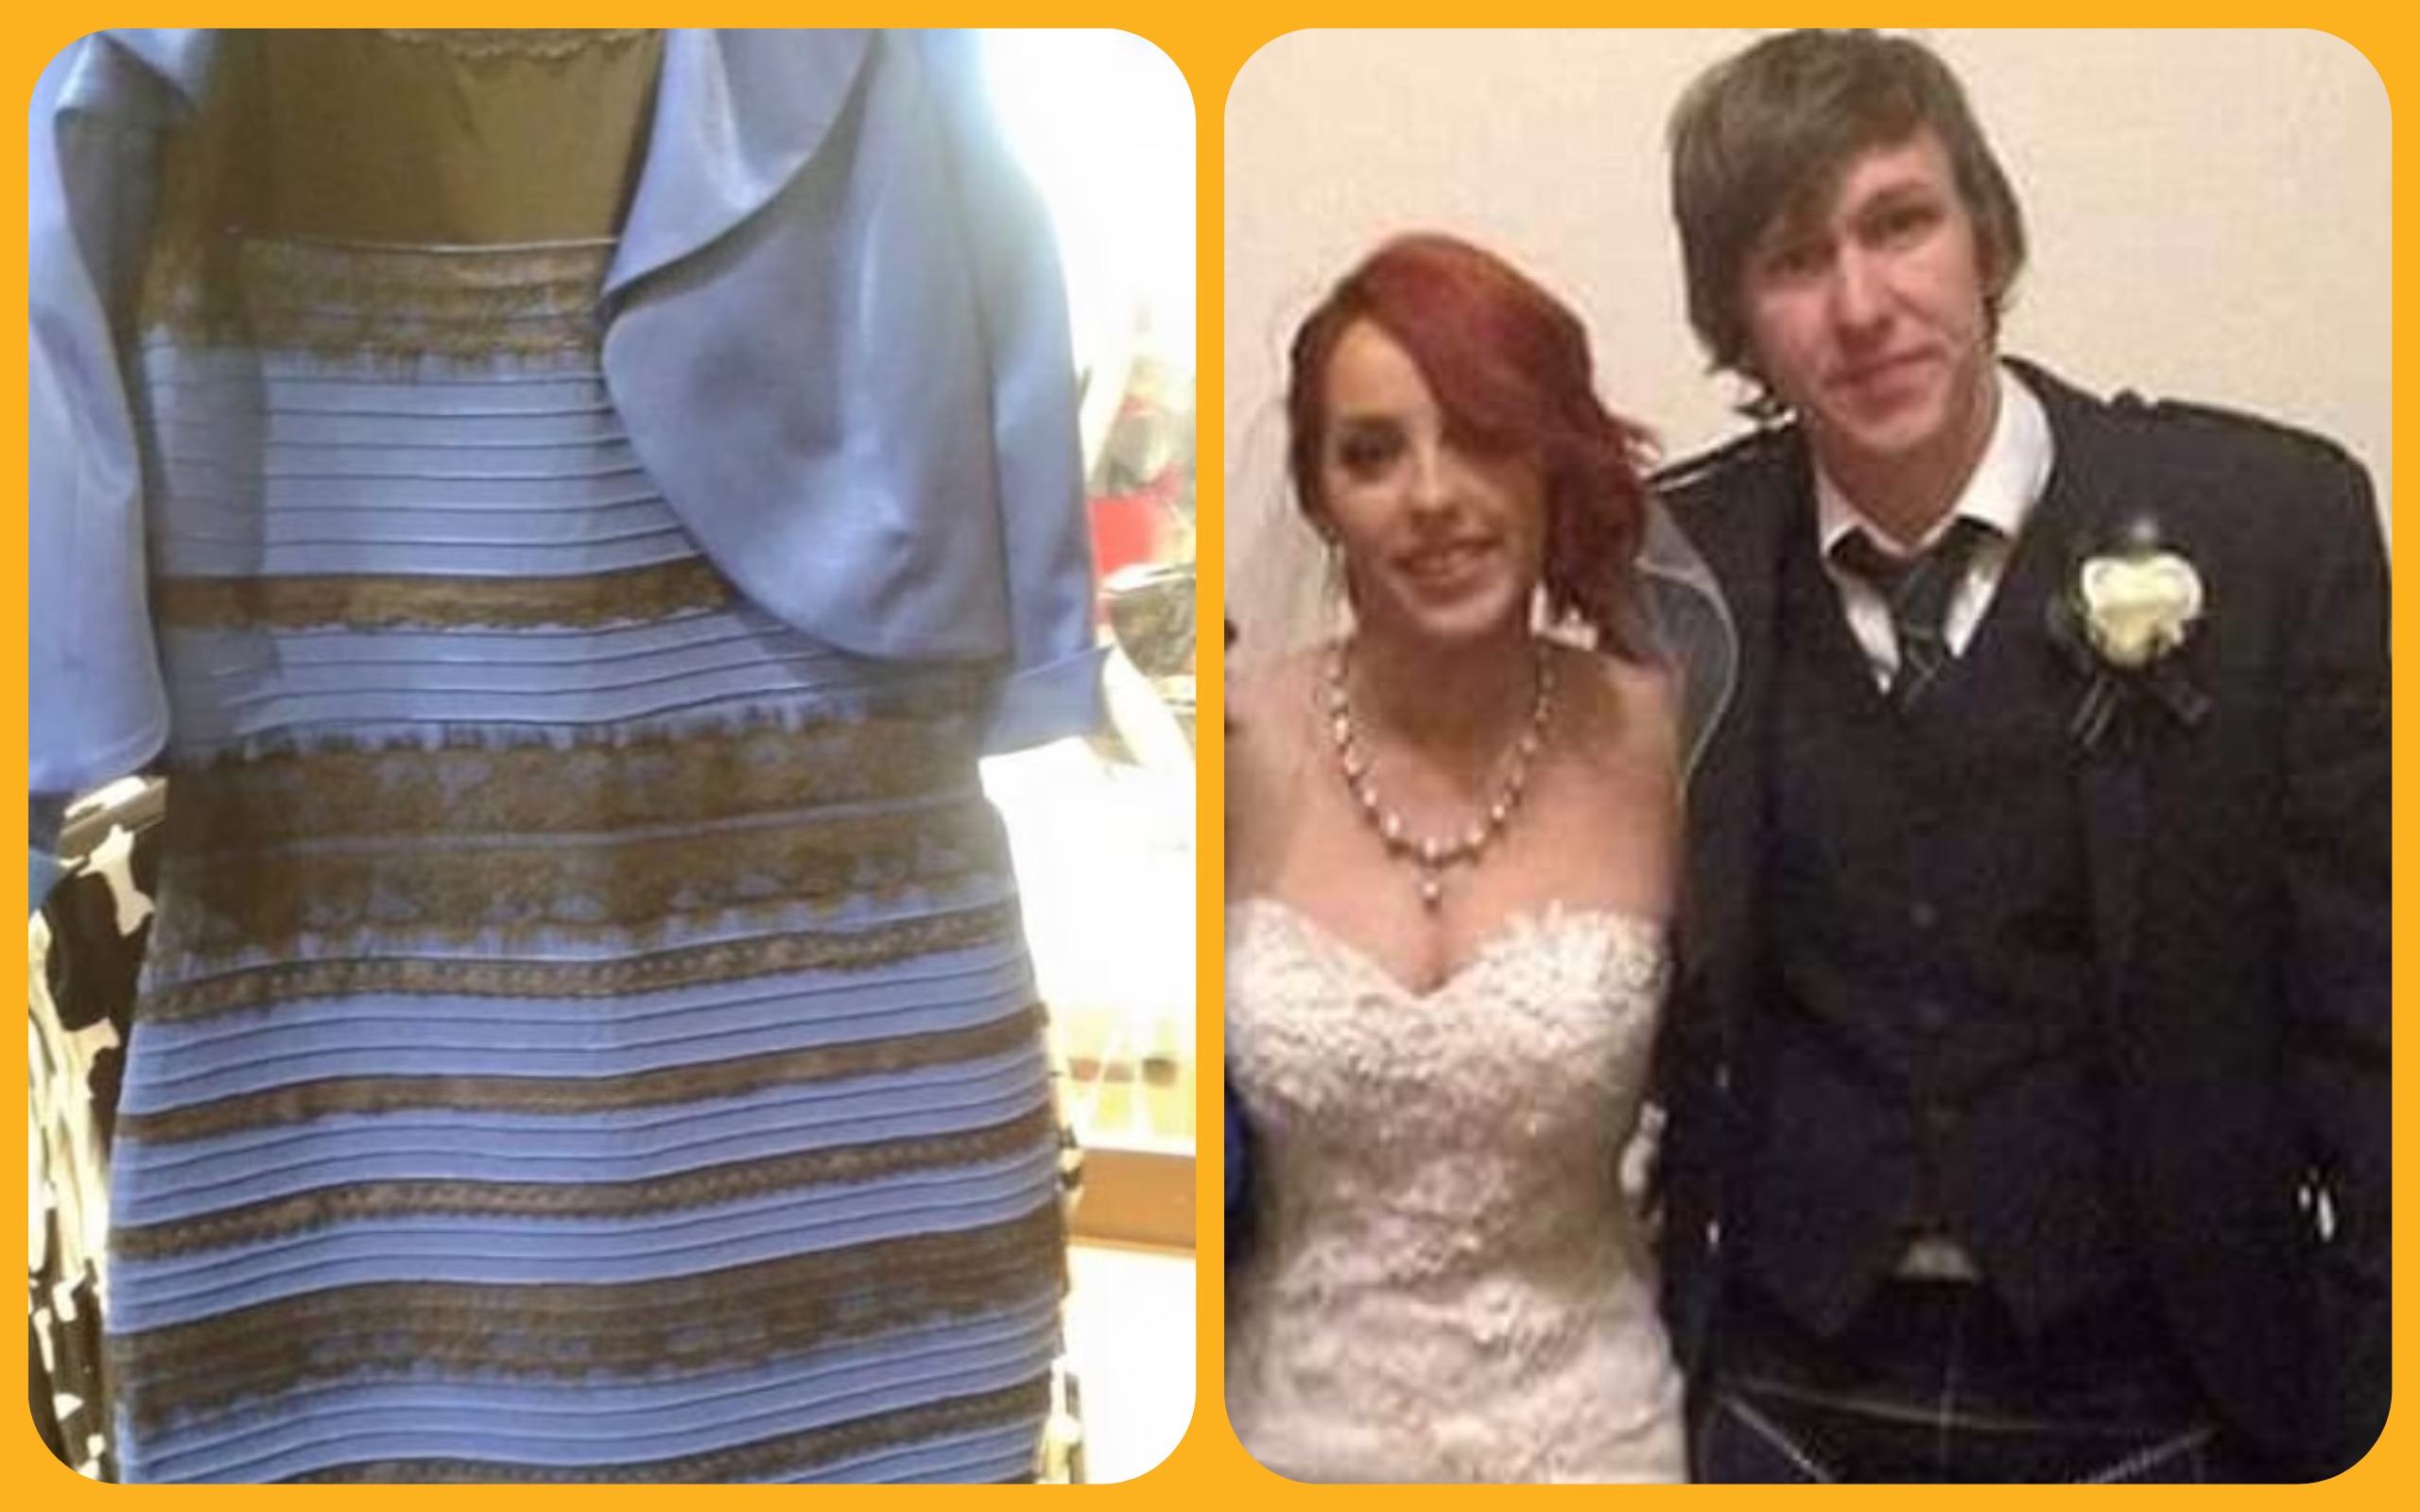 Keir Johnston, known for the viral “dress that broke the internet” in 2015